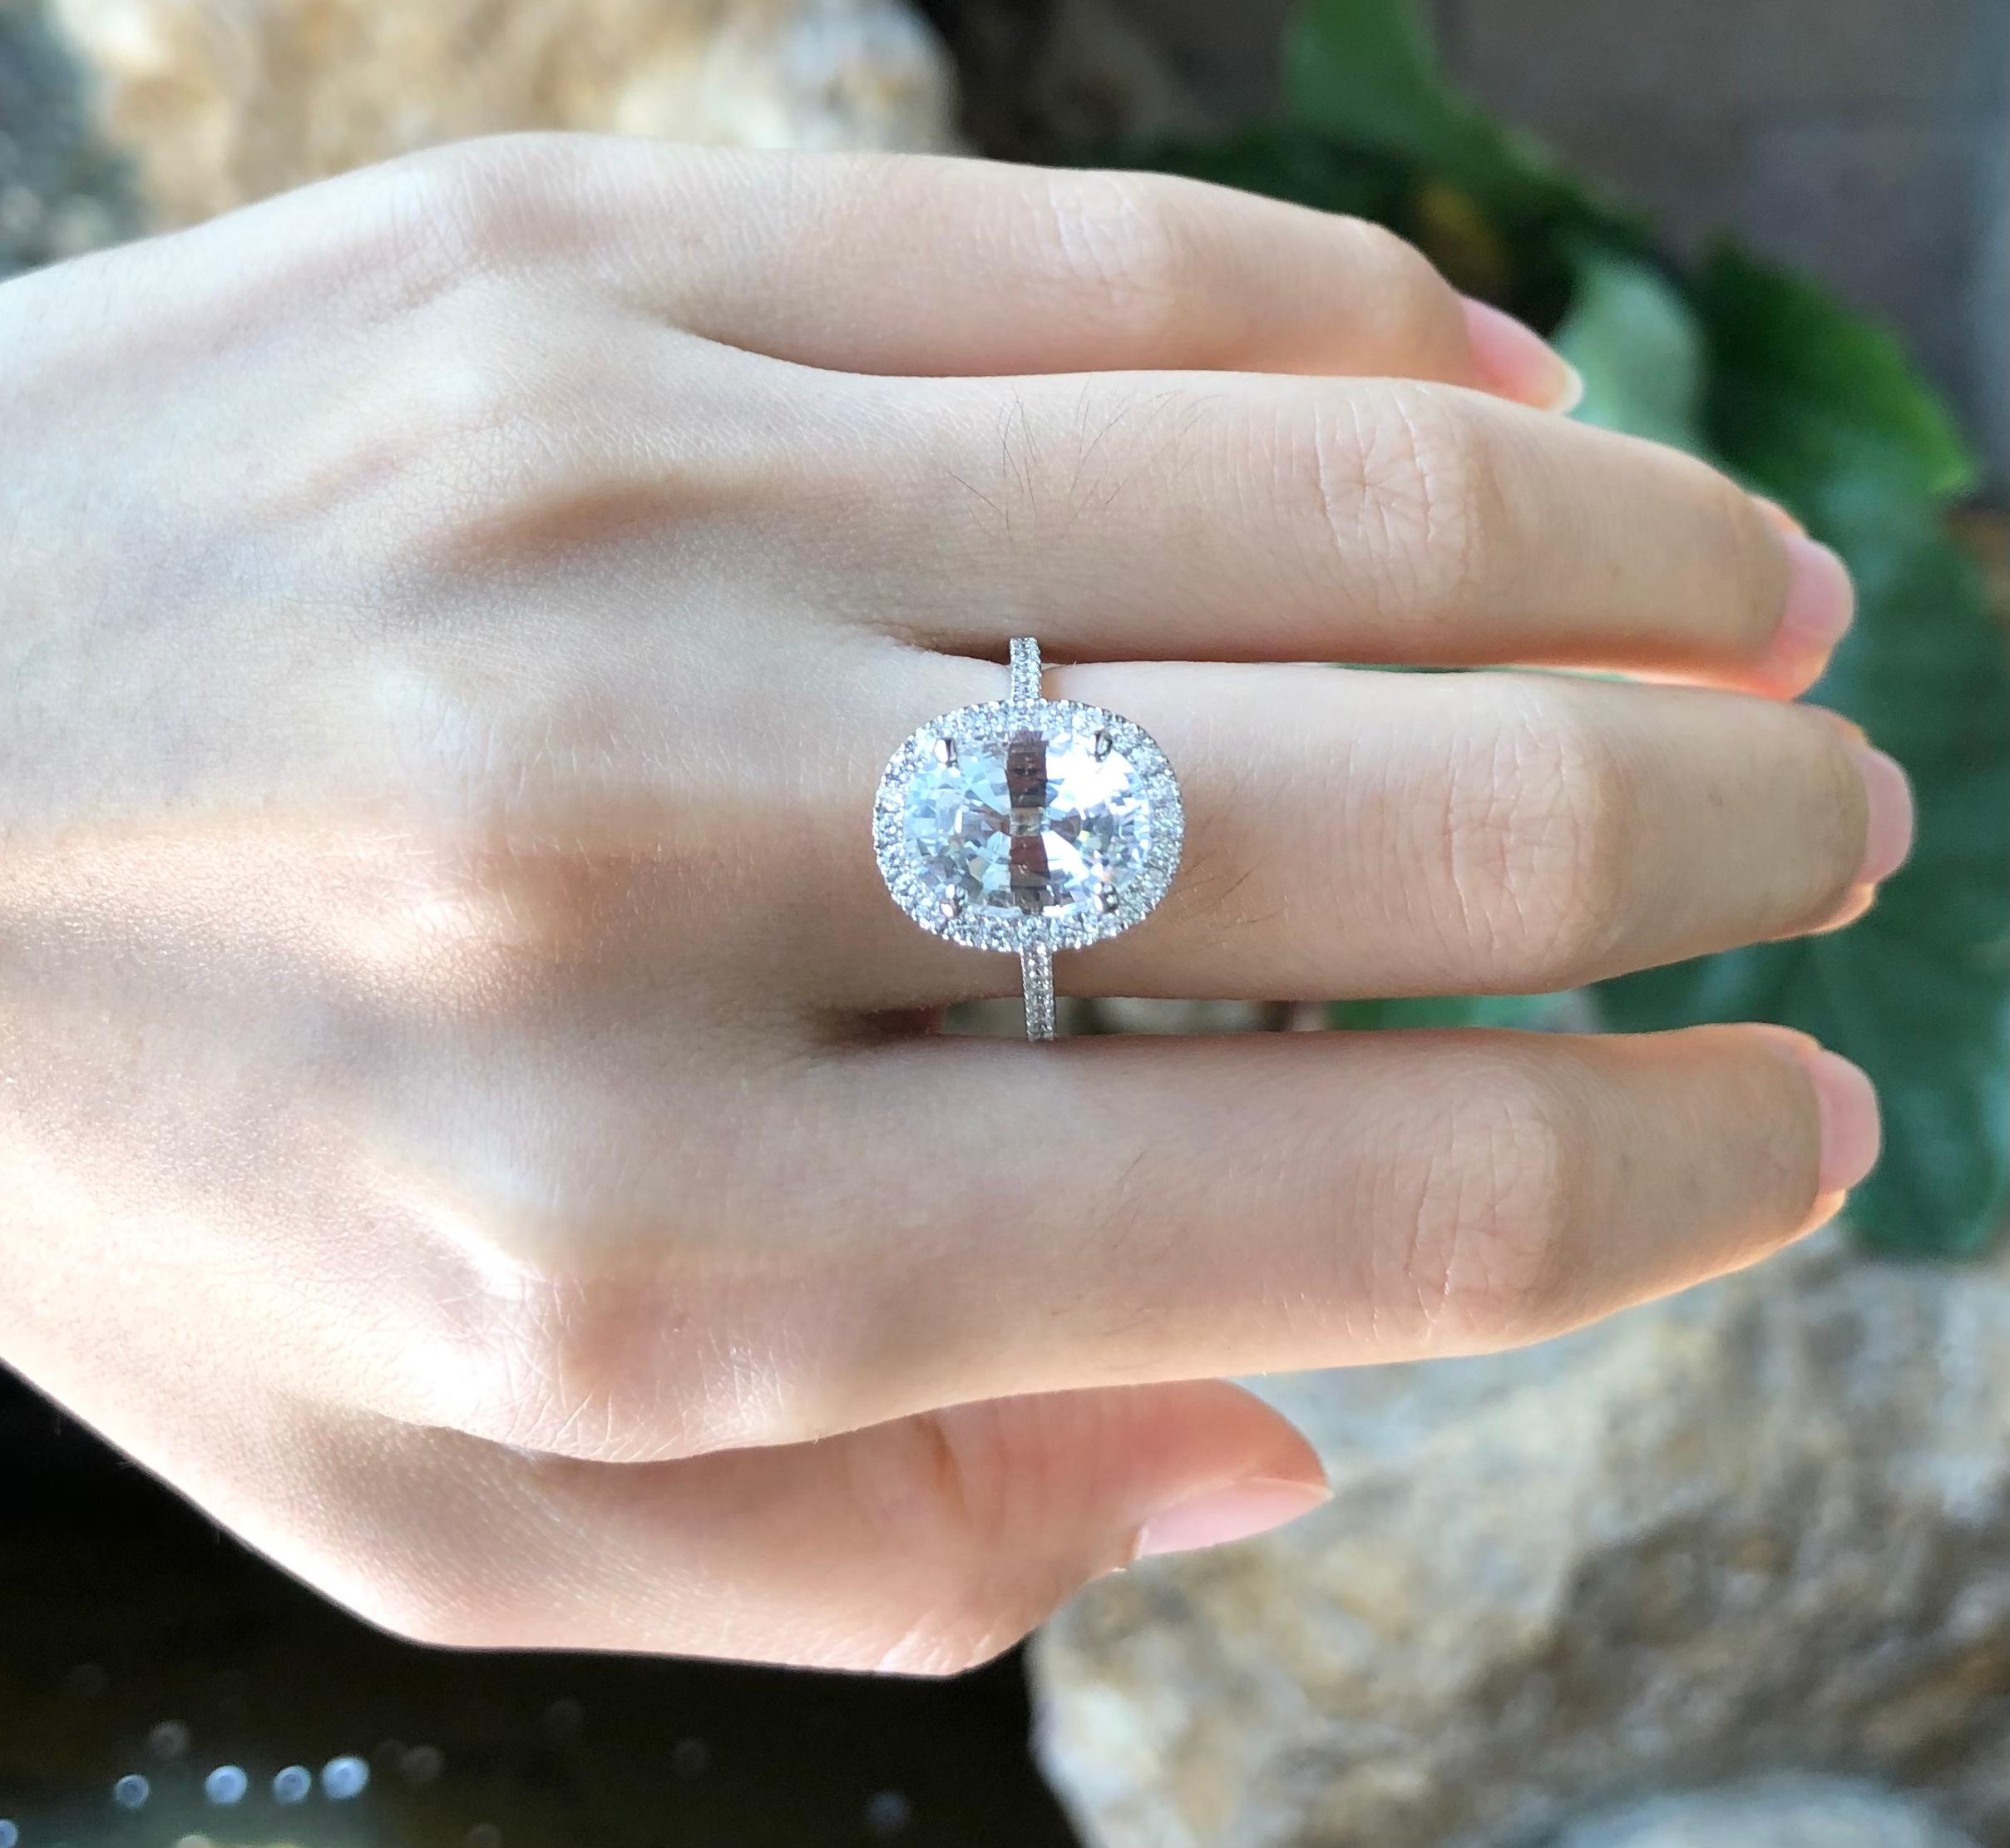 Certified White Sapphire 5.01 carats with Diamond 0.45 carat Ring set in 18 Karat White Gold Settings
(GIT Certified, The Gem and Jewelry Institute of Thailand)

Width:  1.2 cm 
Length:  1.5 cm
Ring Size: 53
Total Weight: 5.71 grams

White